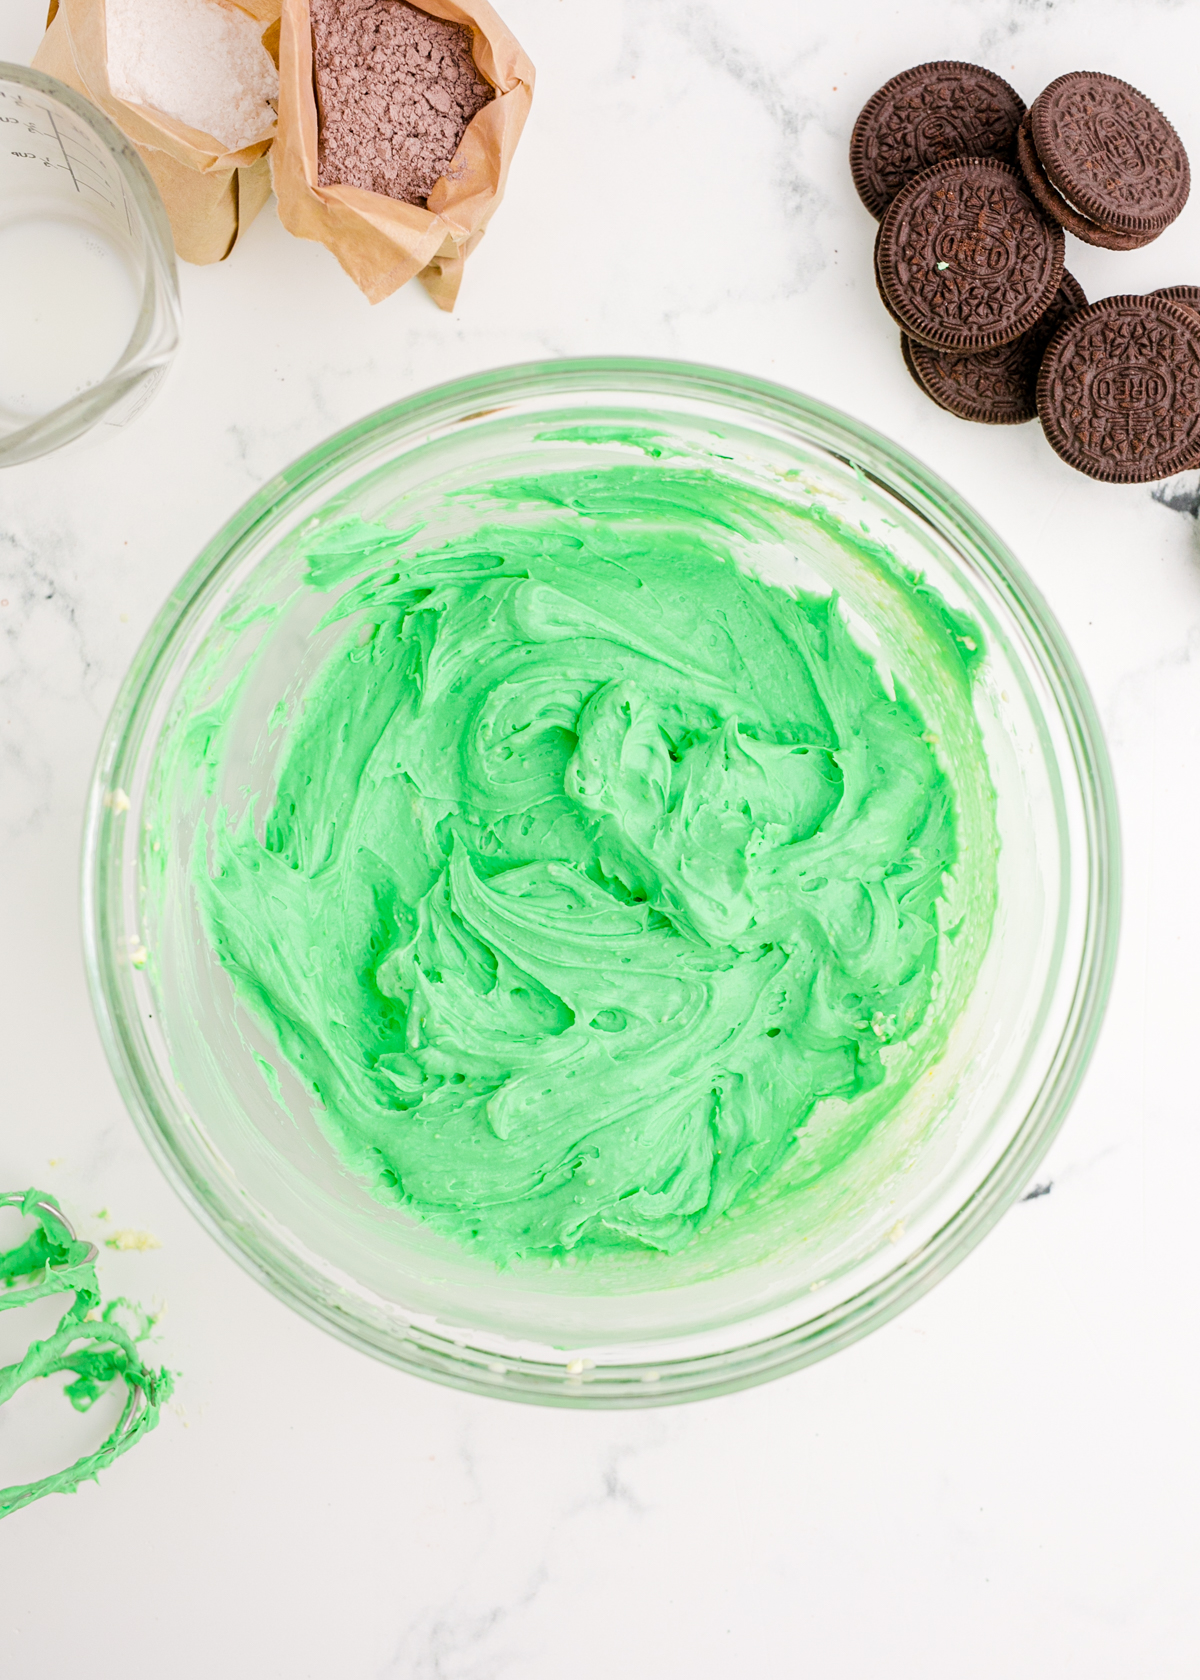 Green pudding mix in a glass bowl